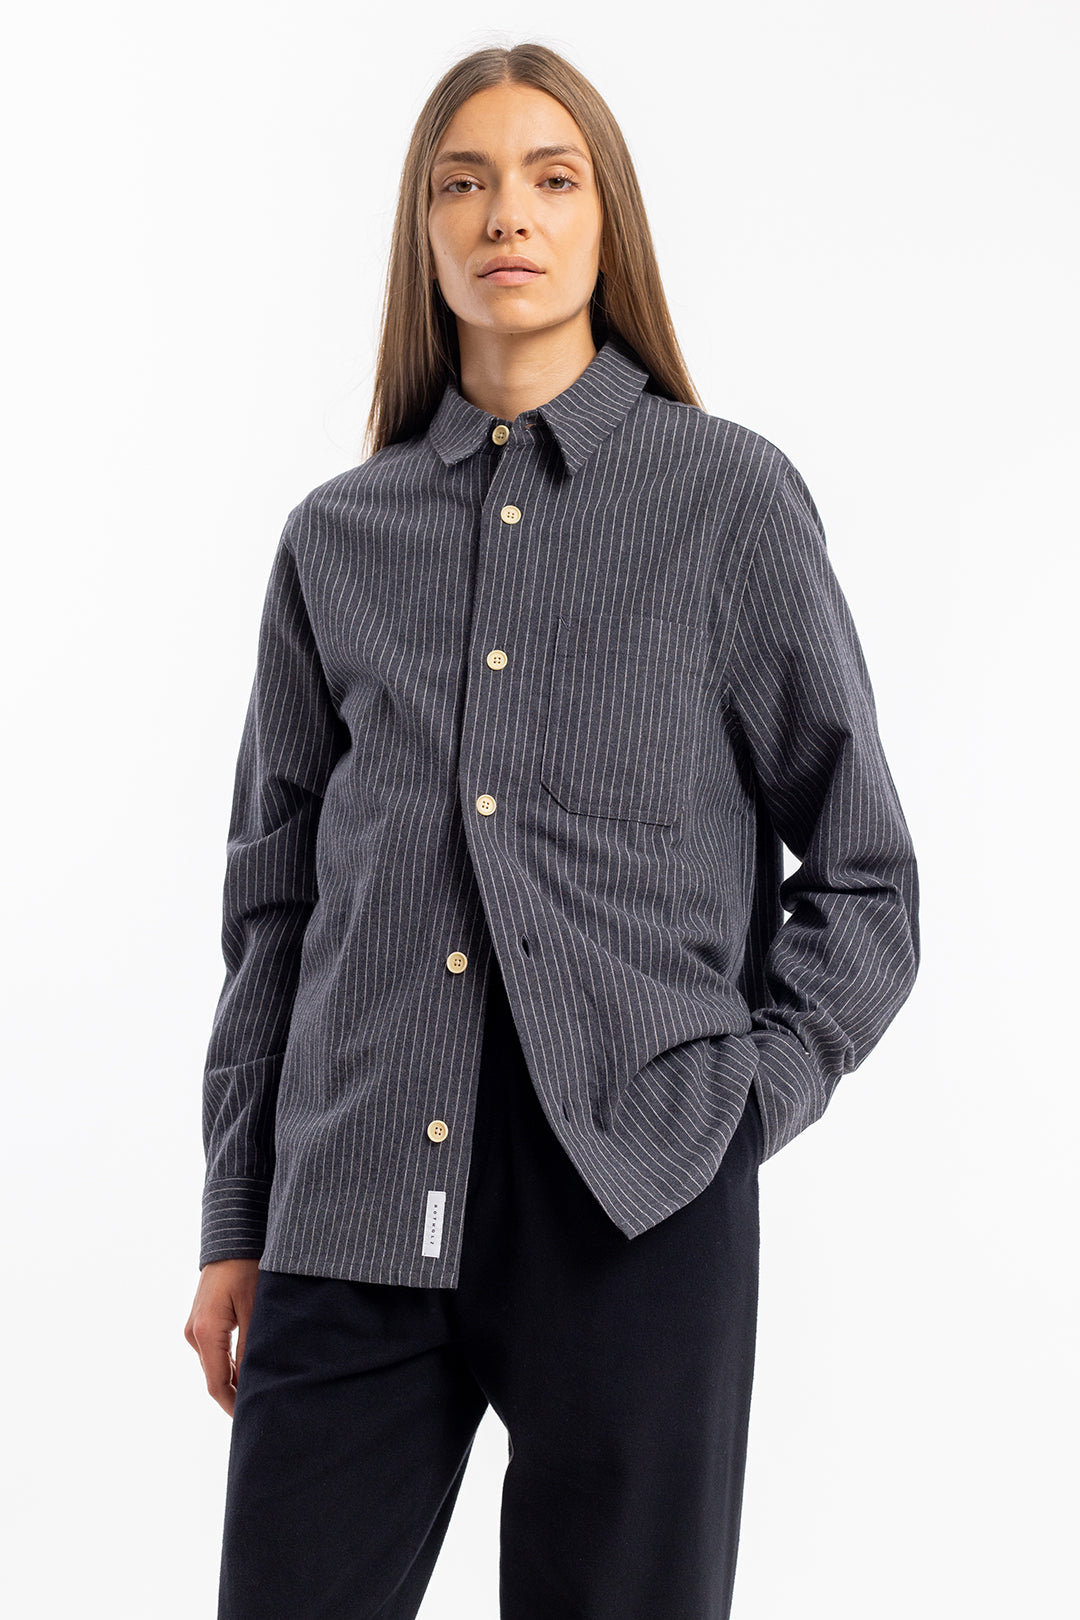 Anthracite, striped cotton shirt from Rotholz